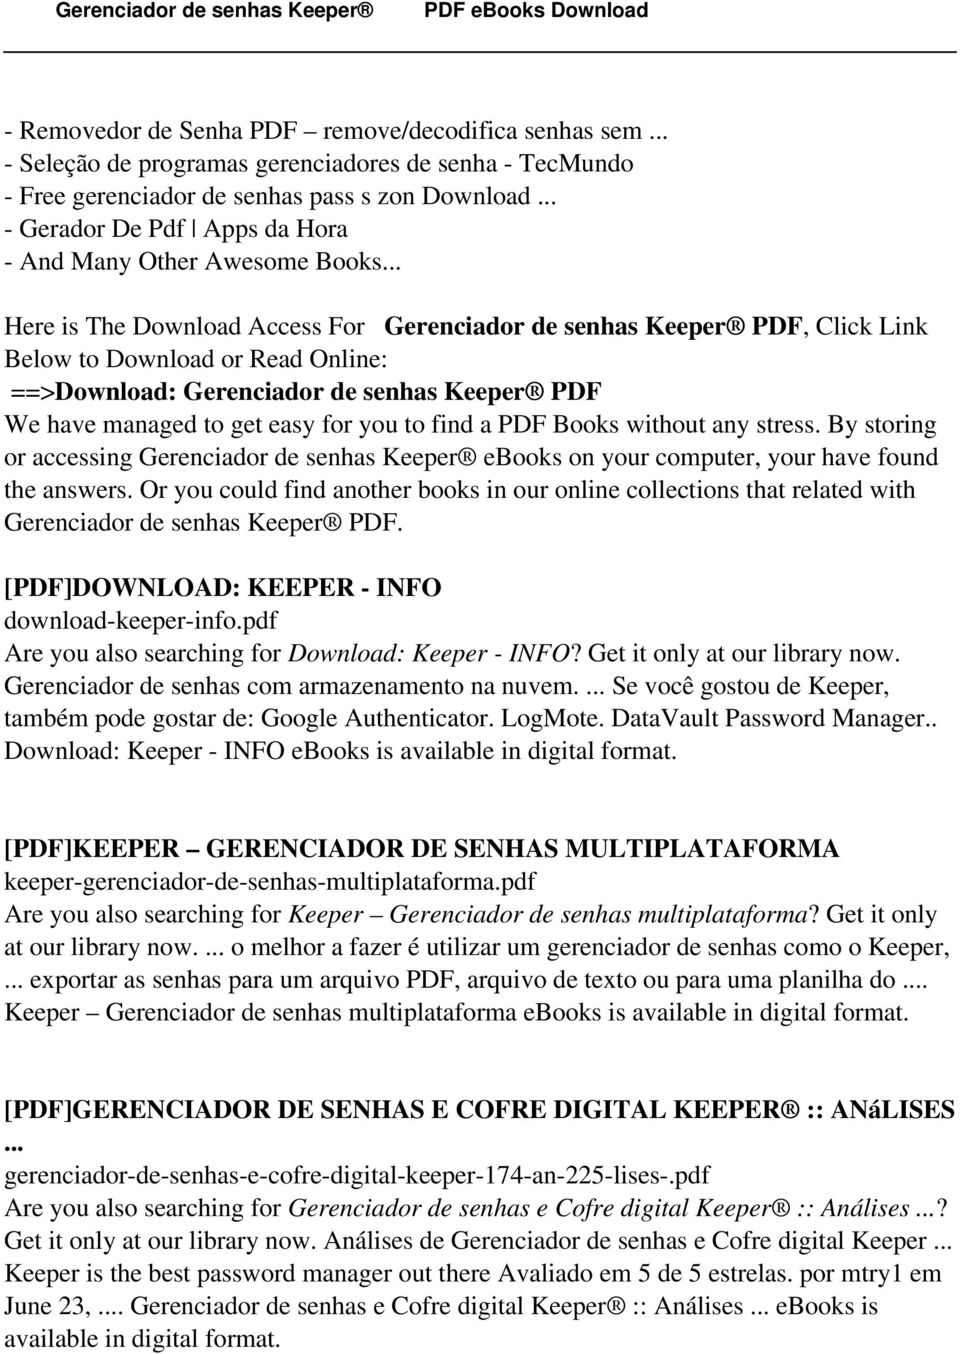 .. Here is The Download Access For Gerenciador de senhas Keeper PDF, Click Link Below to Download or Read Online: ==>Download: Gerenciador de senhas Keeper PDF We have managed to get easy for you to